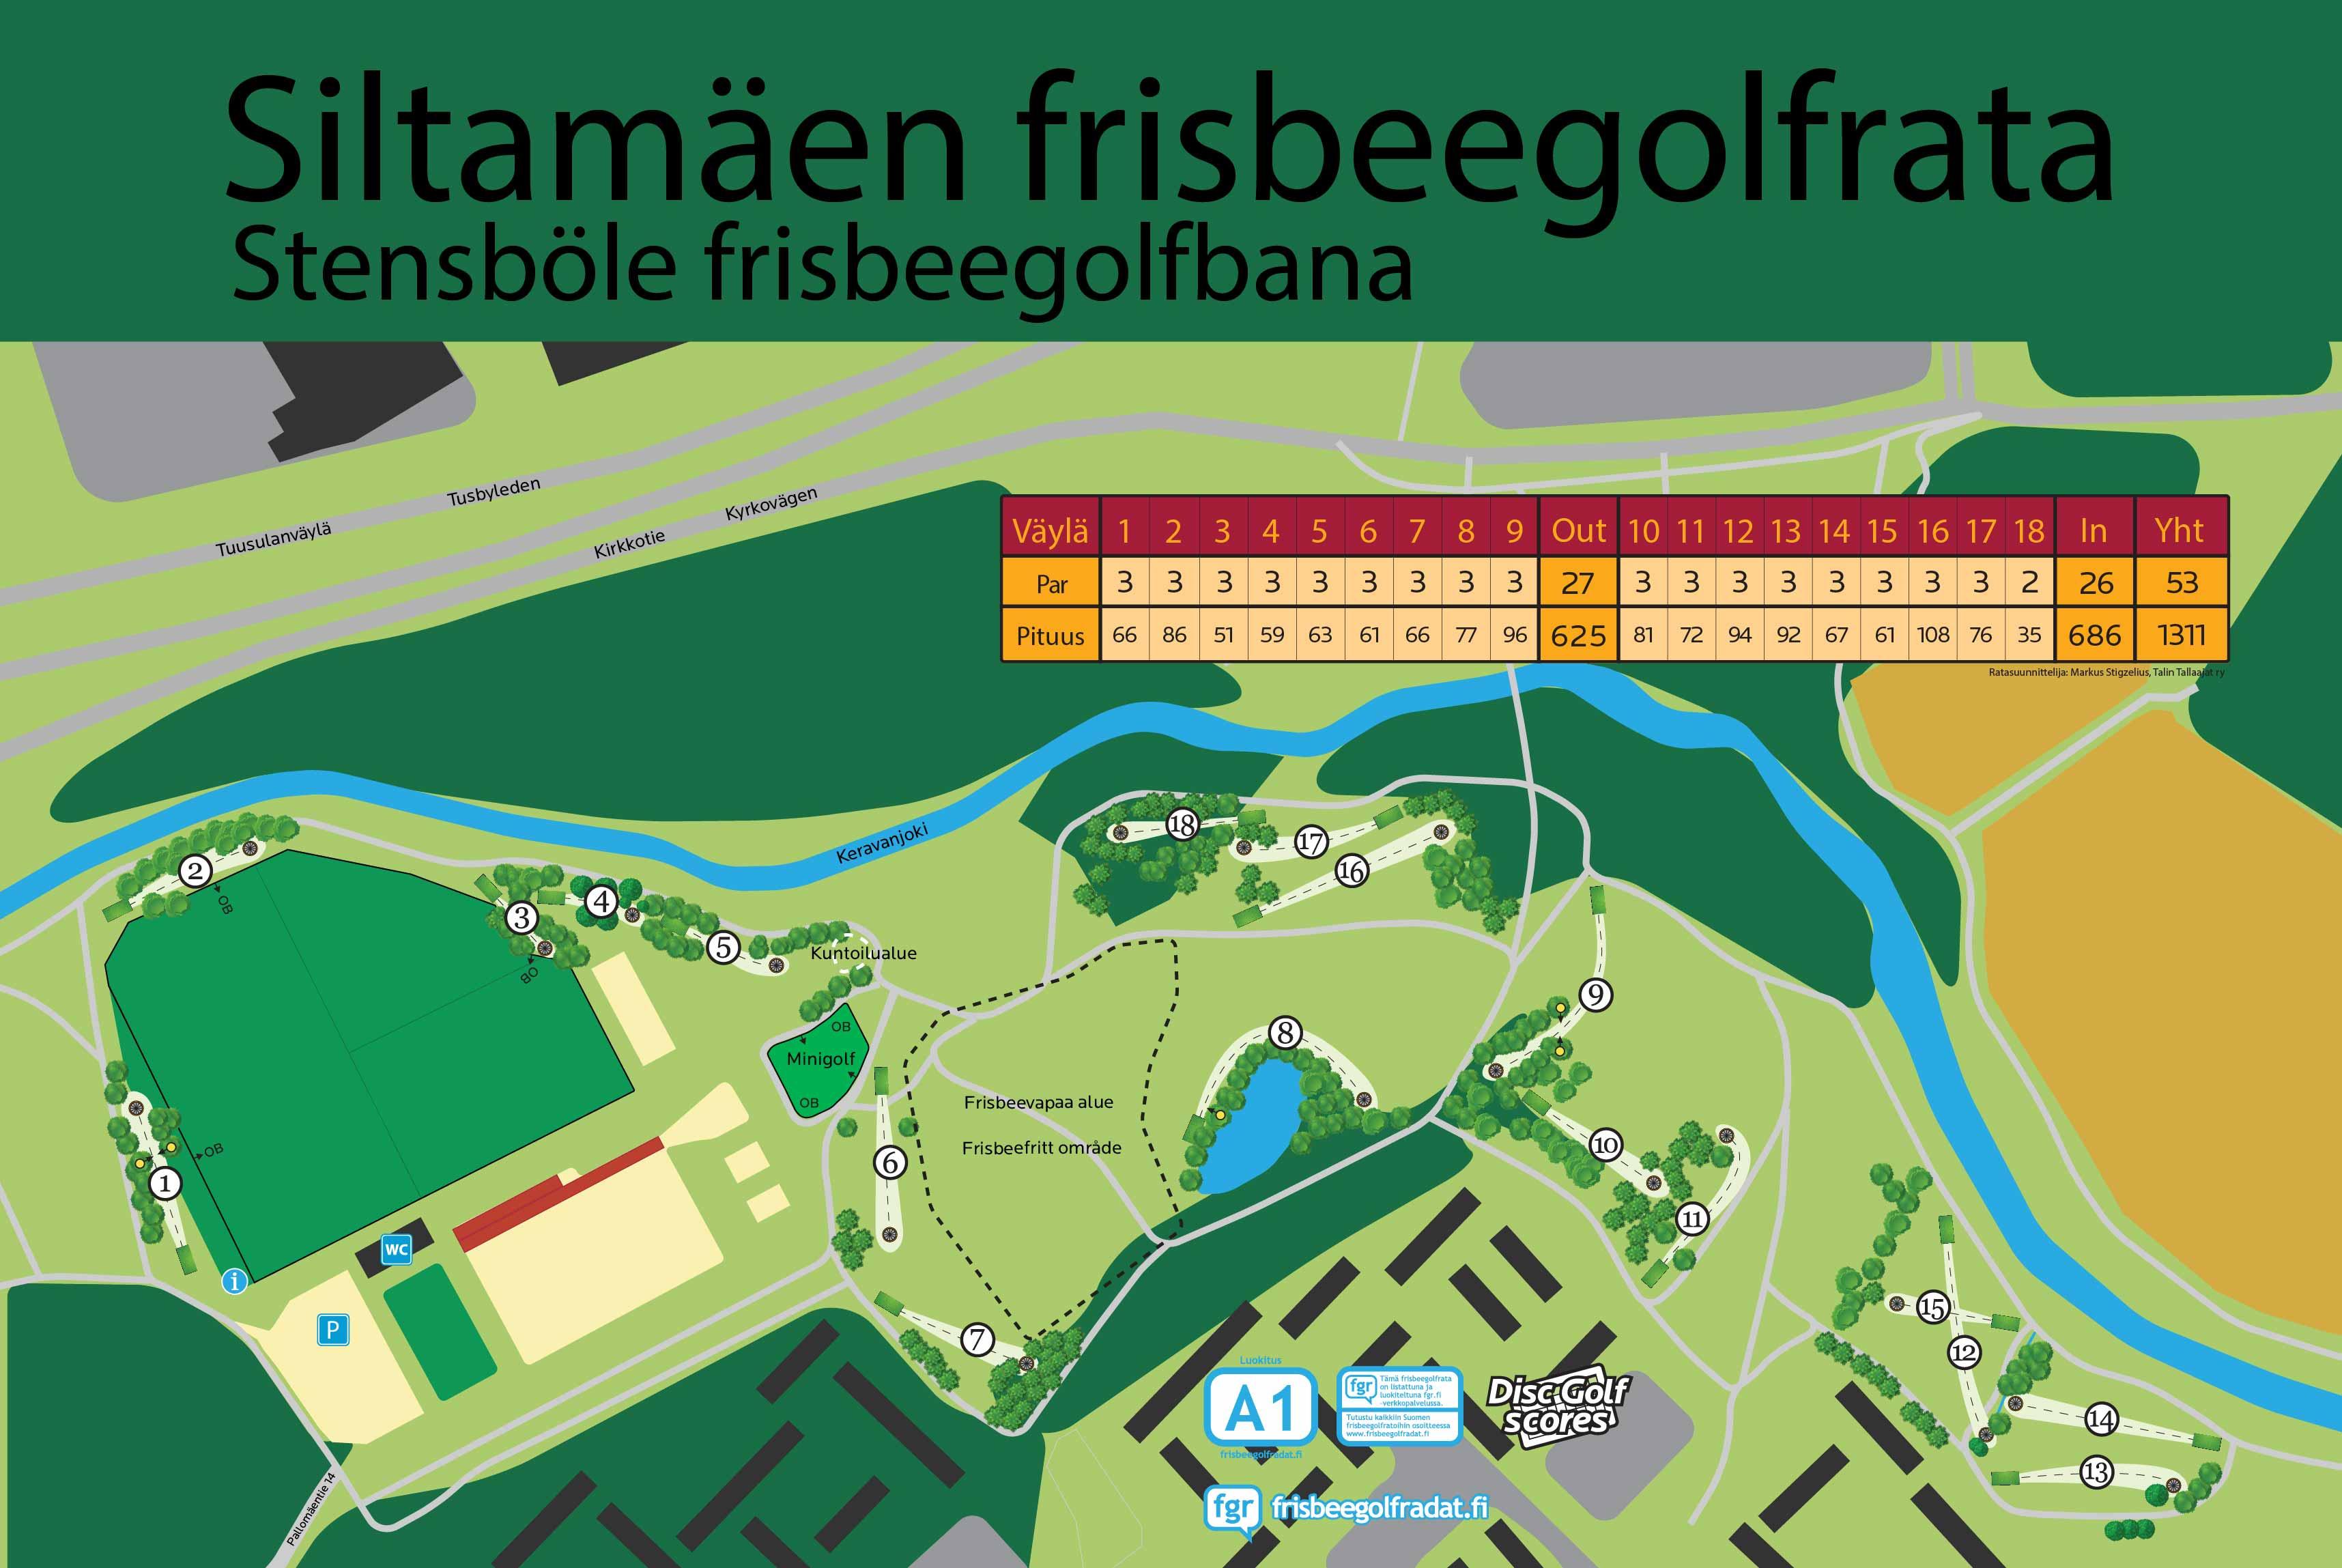 Cover image of this place Siltamäen FrisbeeGolf-rata